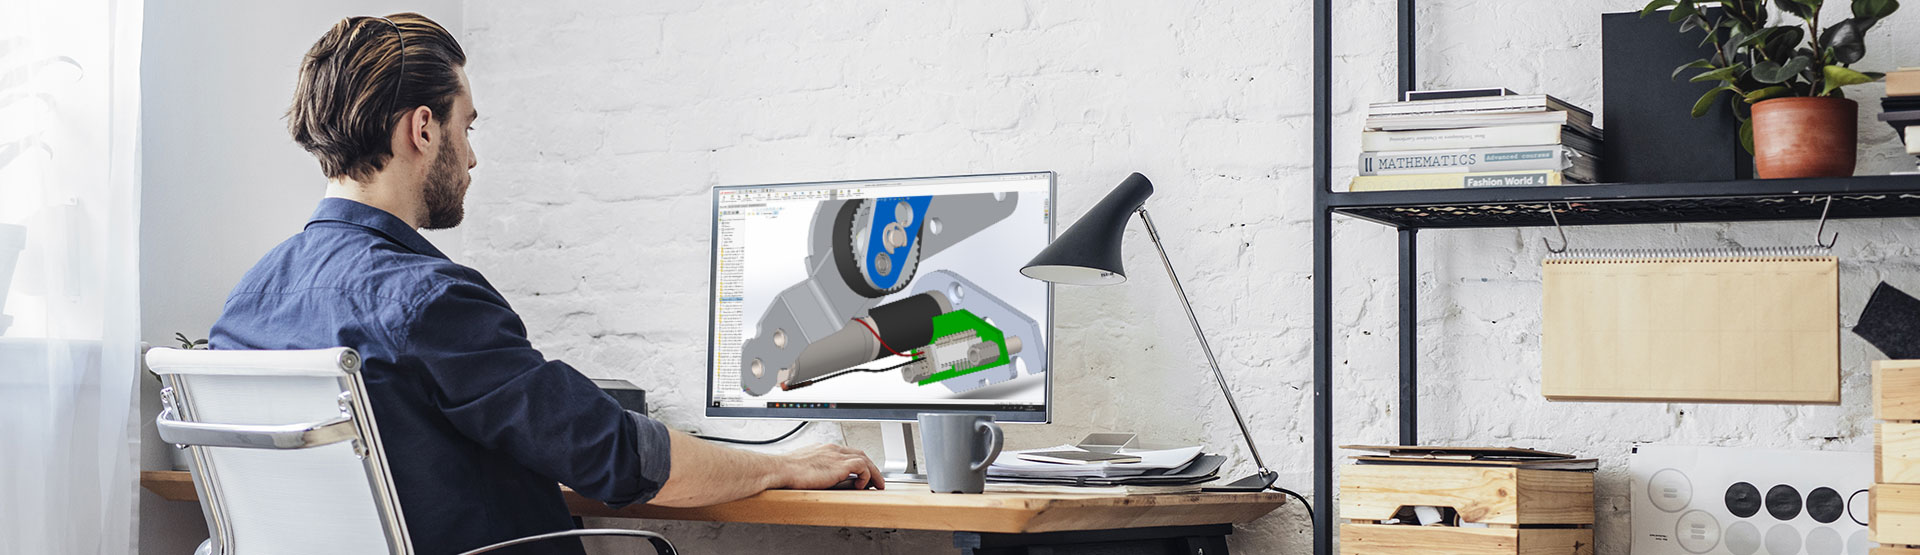 Working from home with SOLIDWORKS - Innova Systems